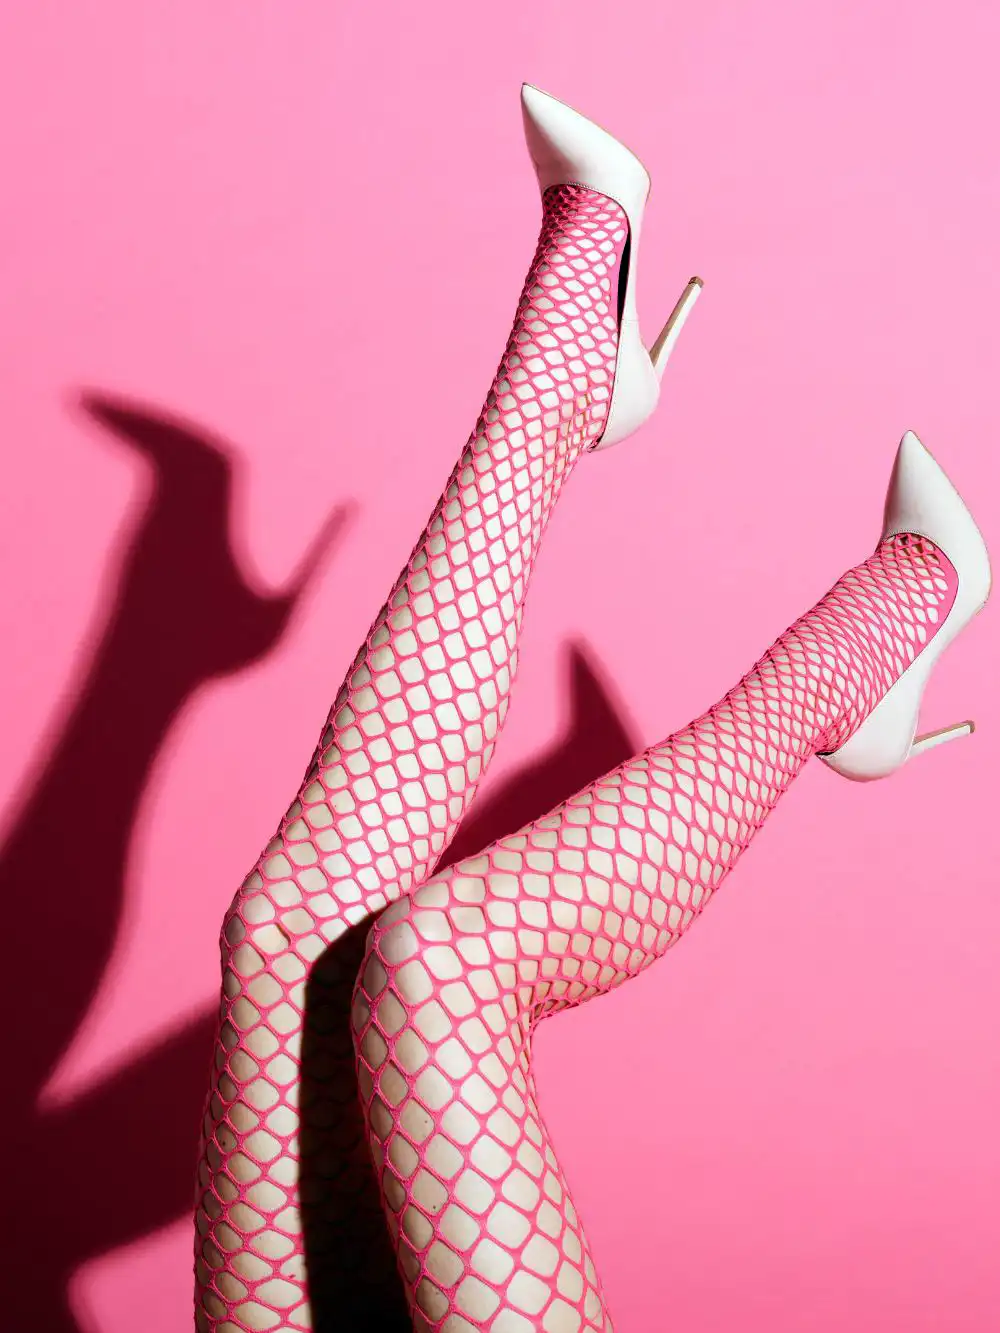 Pink color fishnet stocking legs